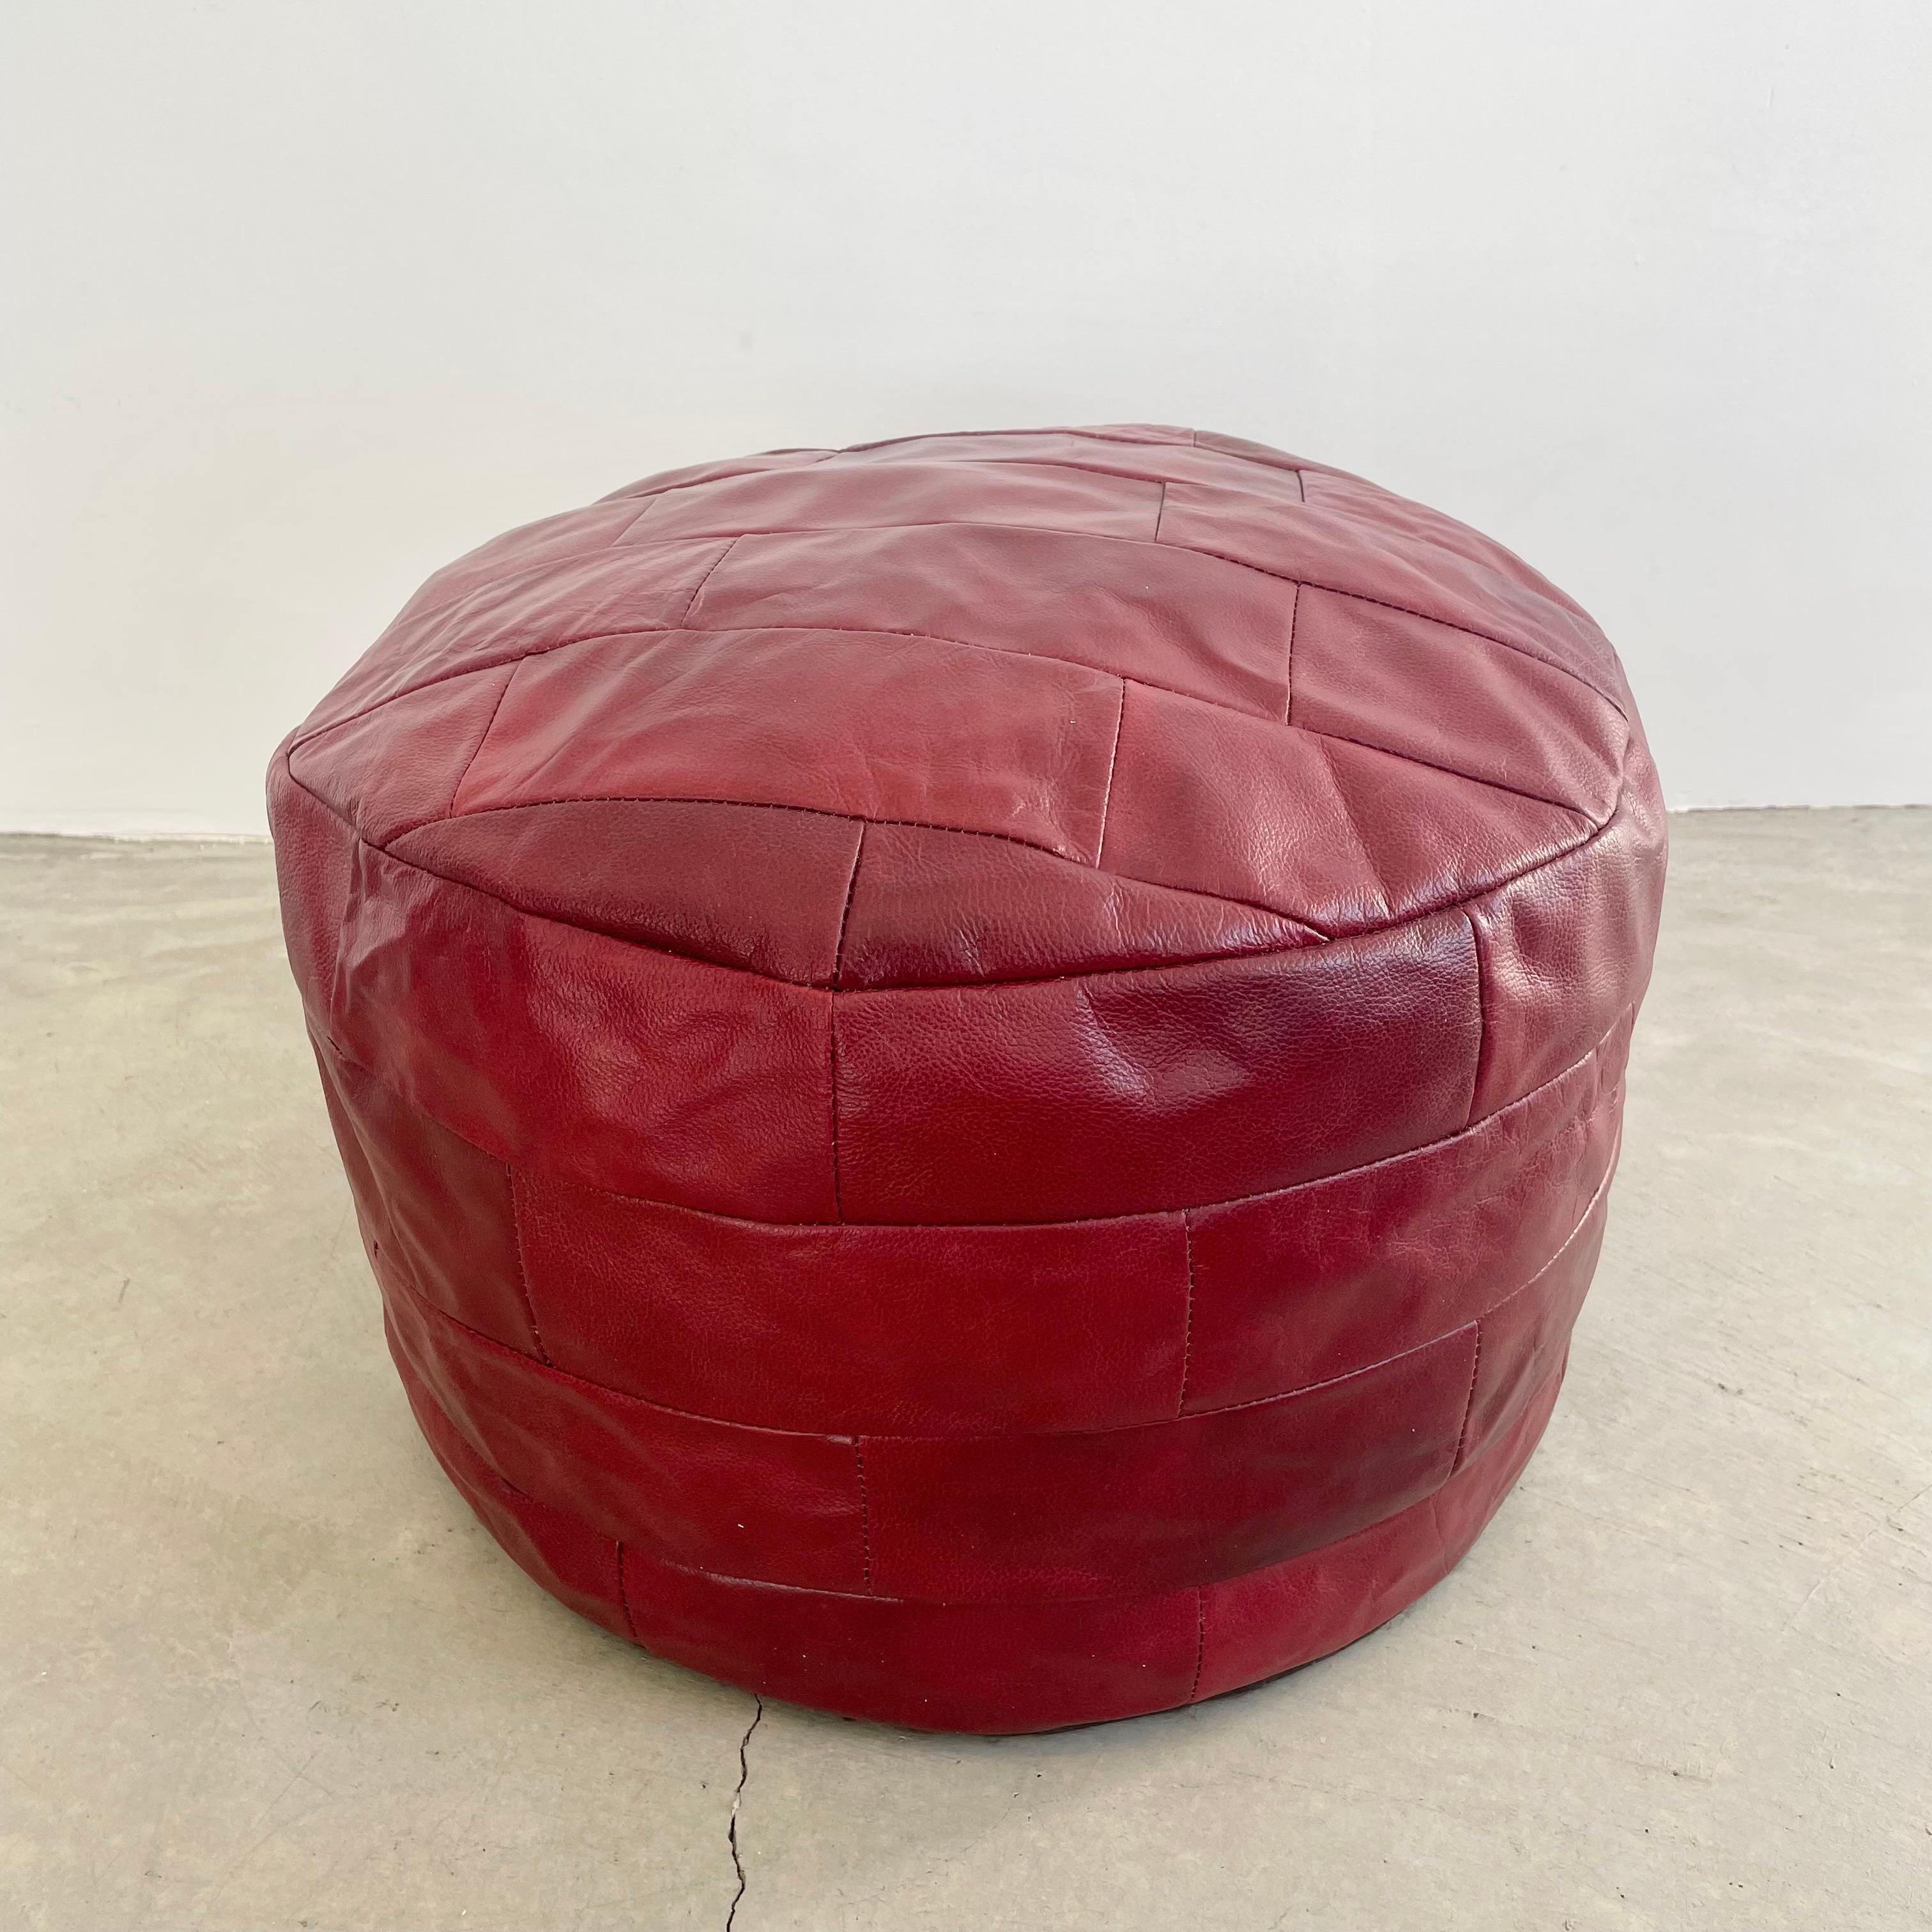 Gorgeous blood red leather pouf/ottoman by Swiss designer De Sede with square patchwork. Handmade with wonderful faded patina or varying hues of reds. Gorgeous accent piece. Good vintage condition. Wear appropriate with age. Brand new filler.